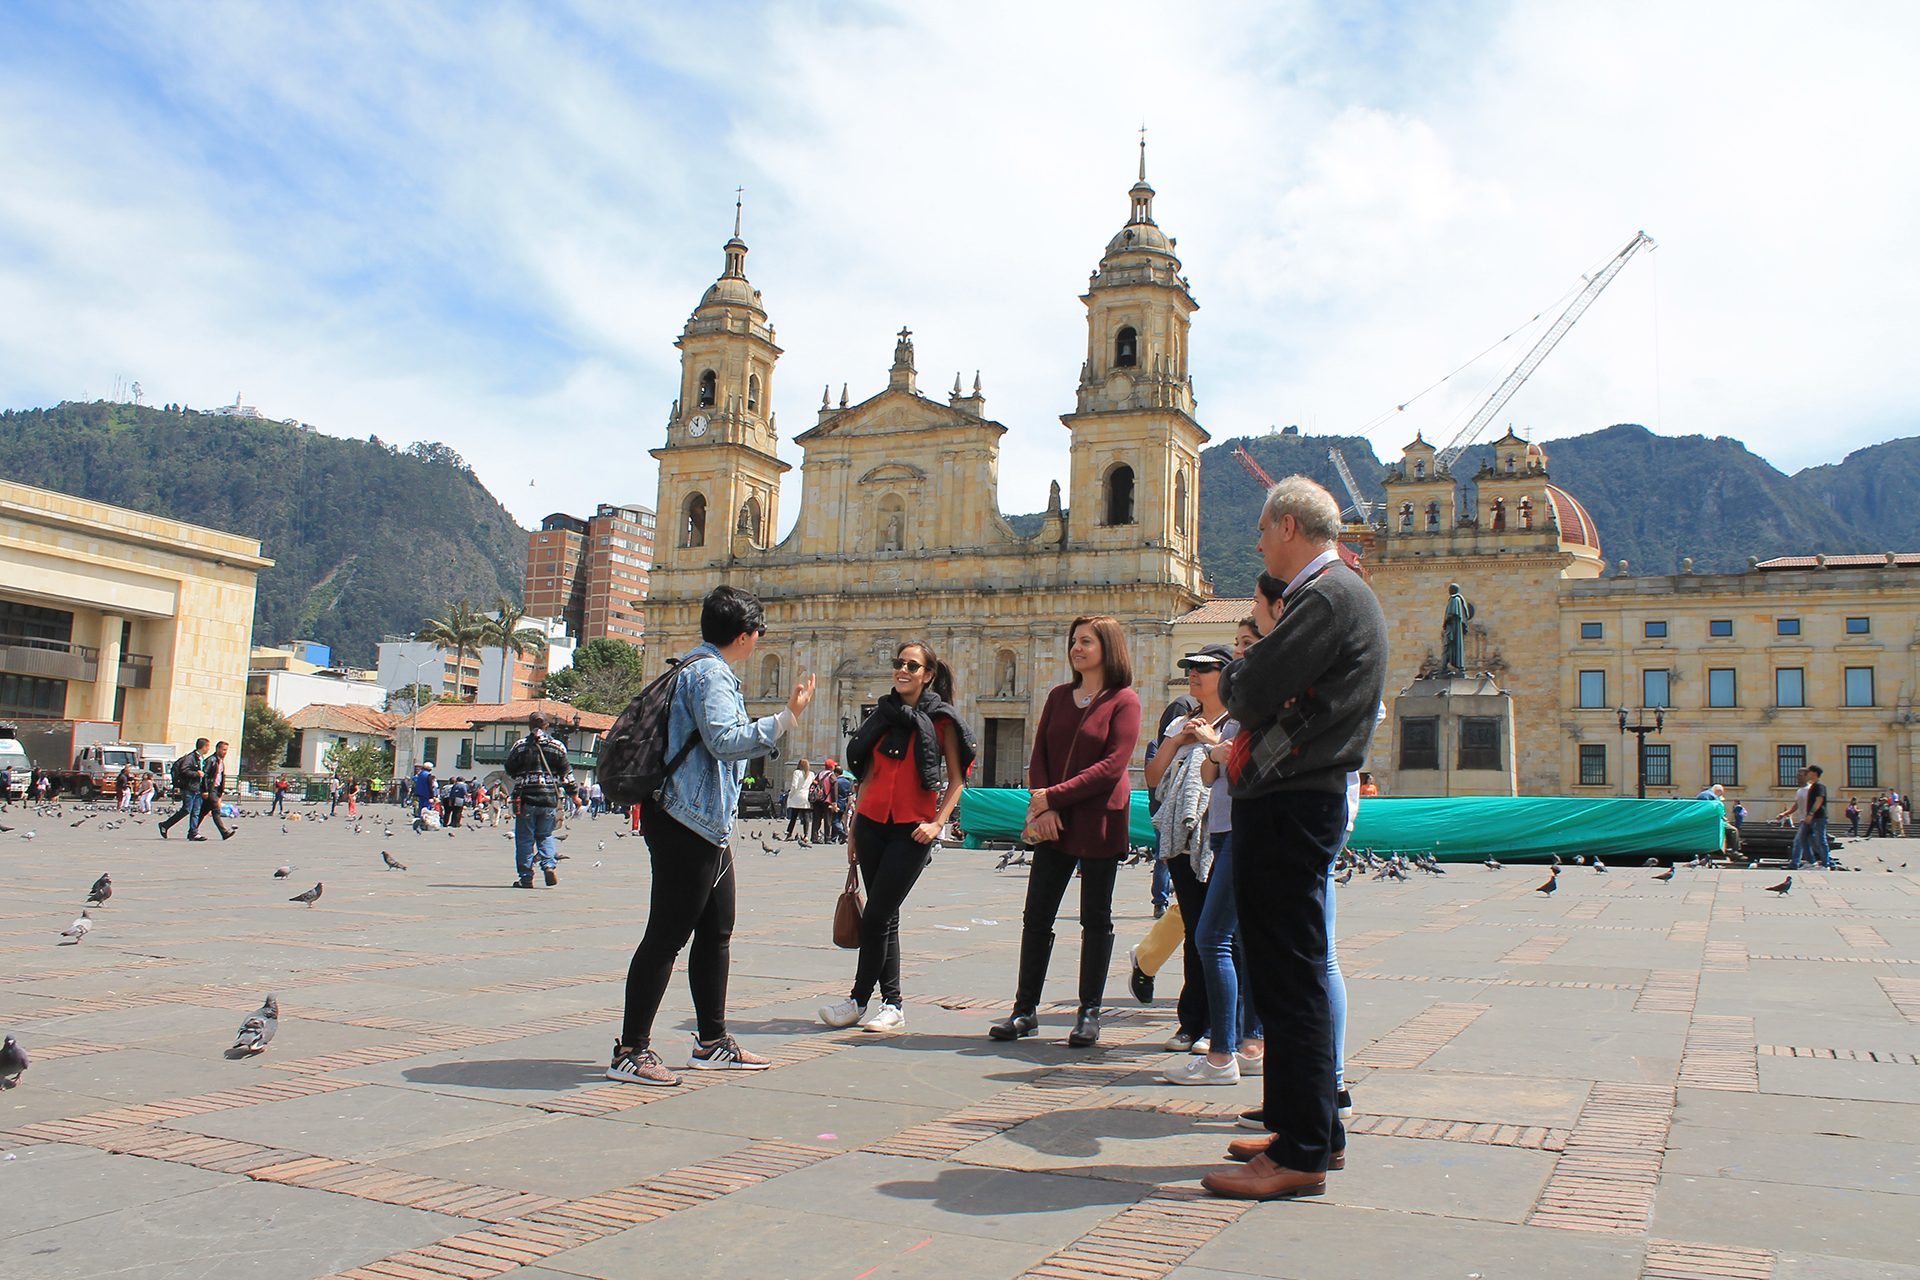 A group of people stands in a plaza in front of a historic building with two towers, surrounded by pigeons. A crane is visible in the background, and mountains can be seen in the distance—a perfect snapshot from one of many Bogotá city tours.